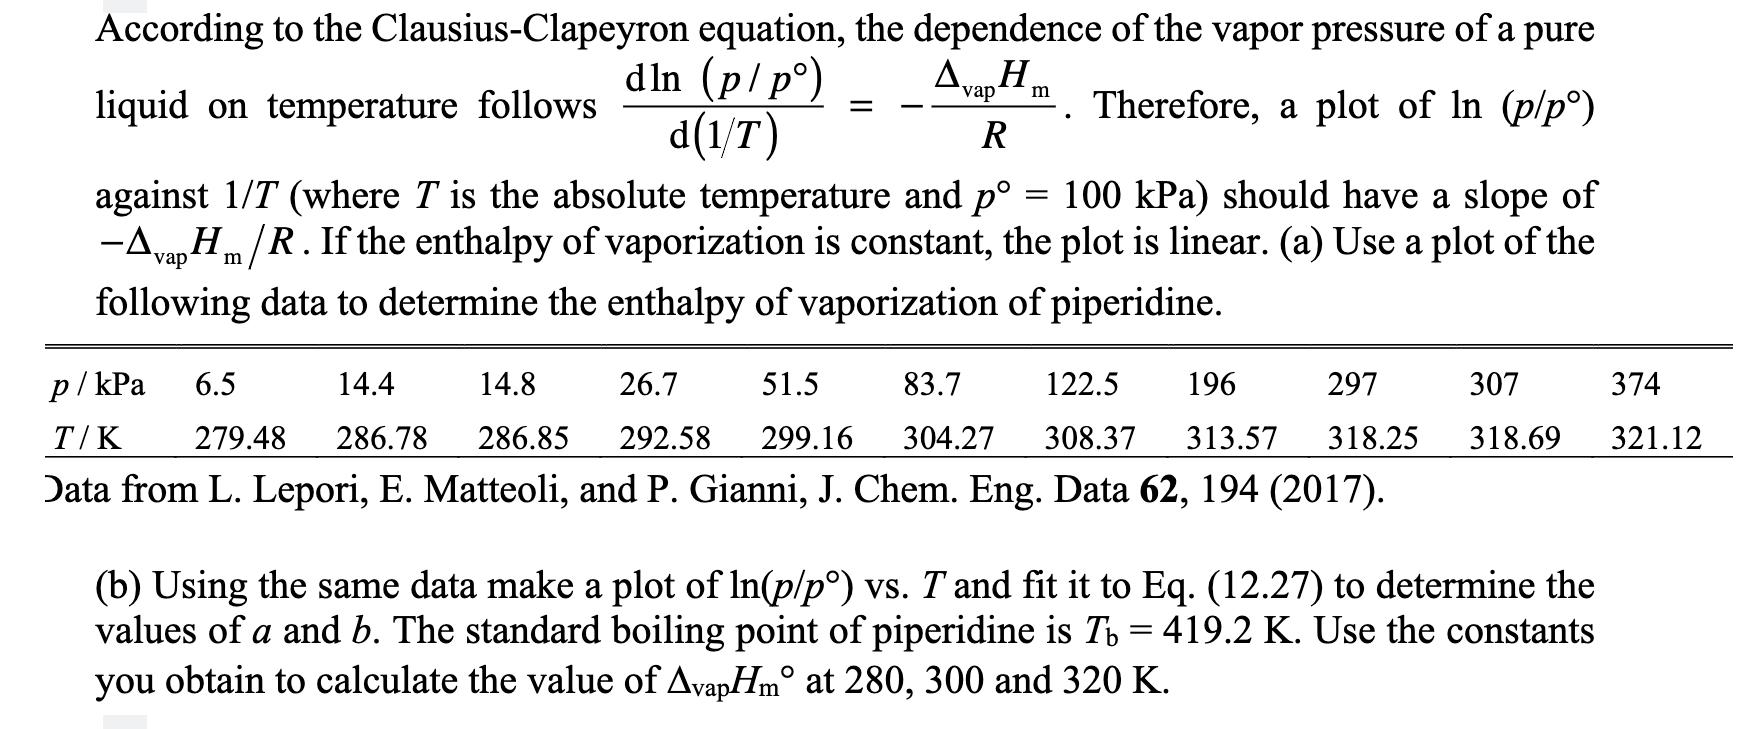 equation, the dependence of the vapor pressure of a pure dln (p/p) AvapHm. Therefore, a plot of In (p/p) .